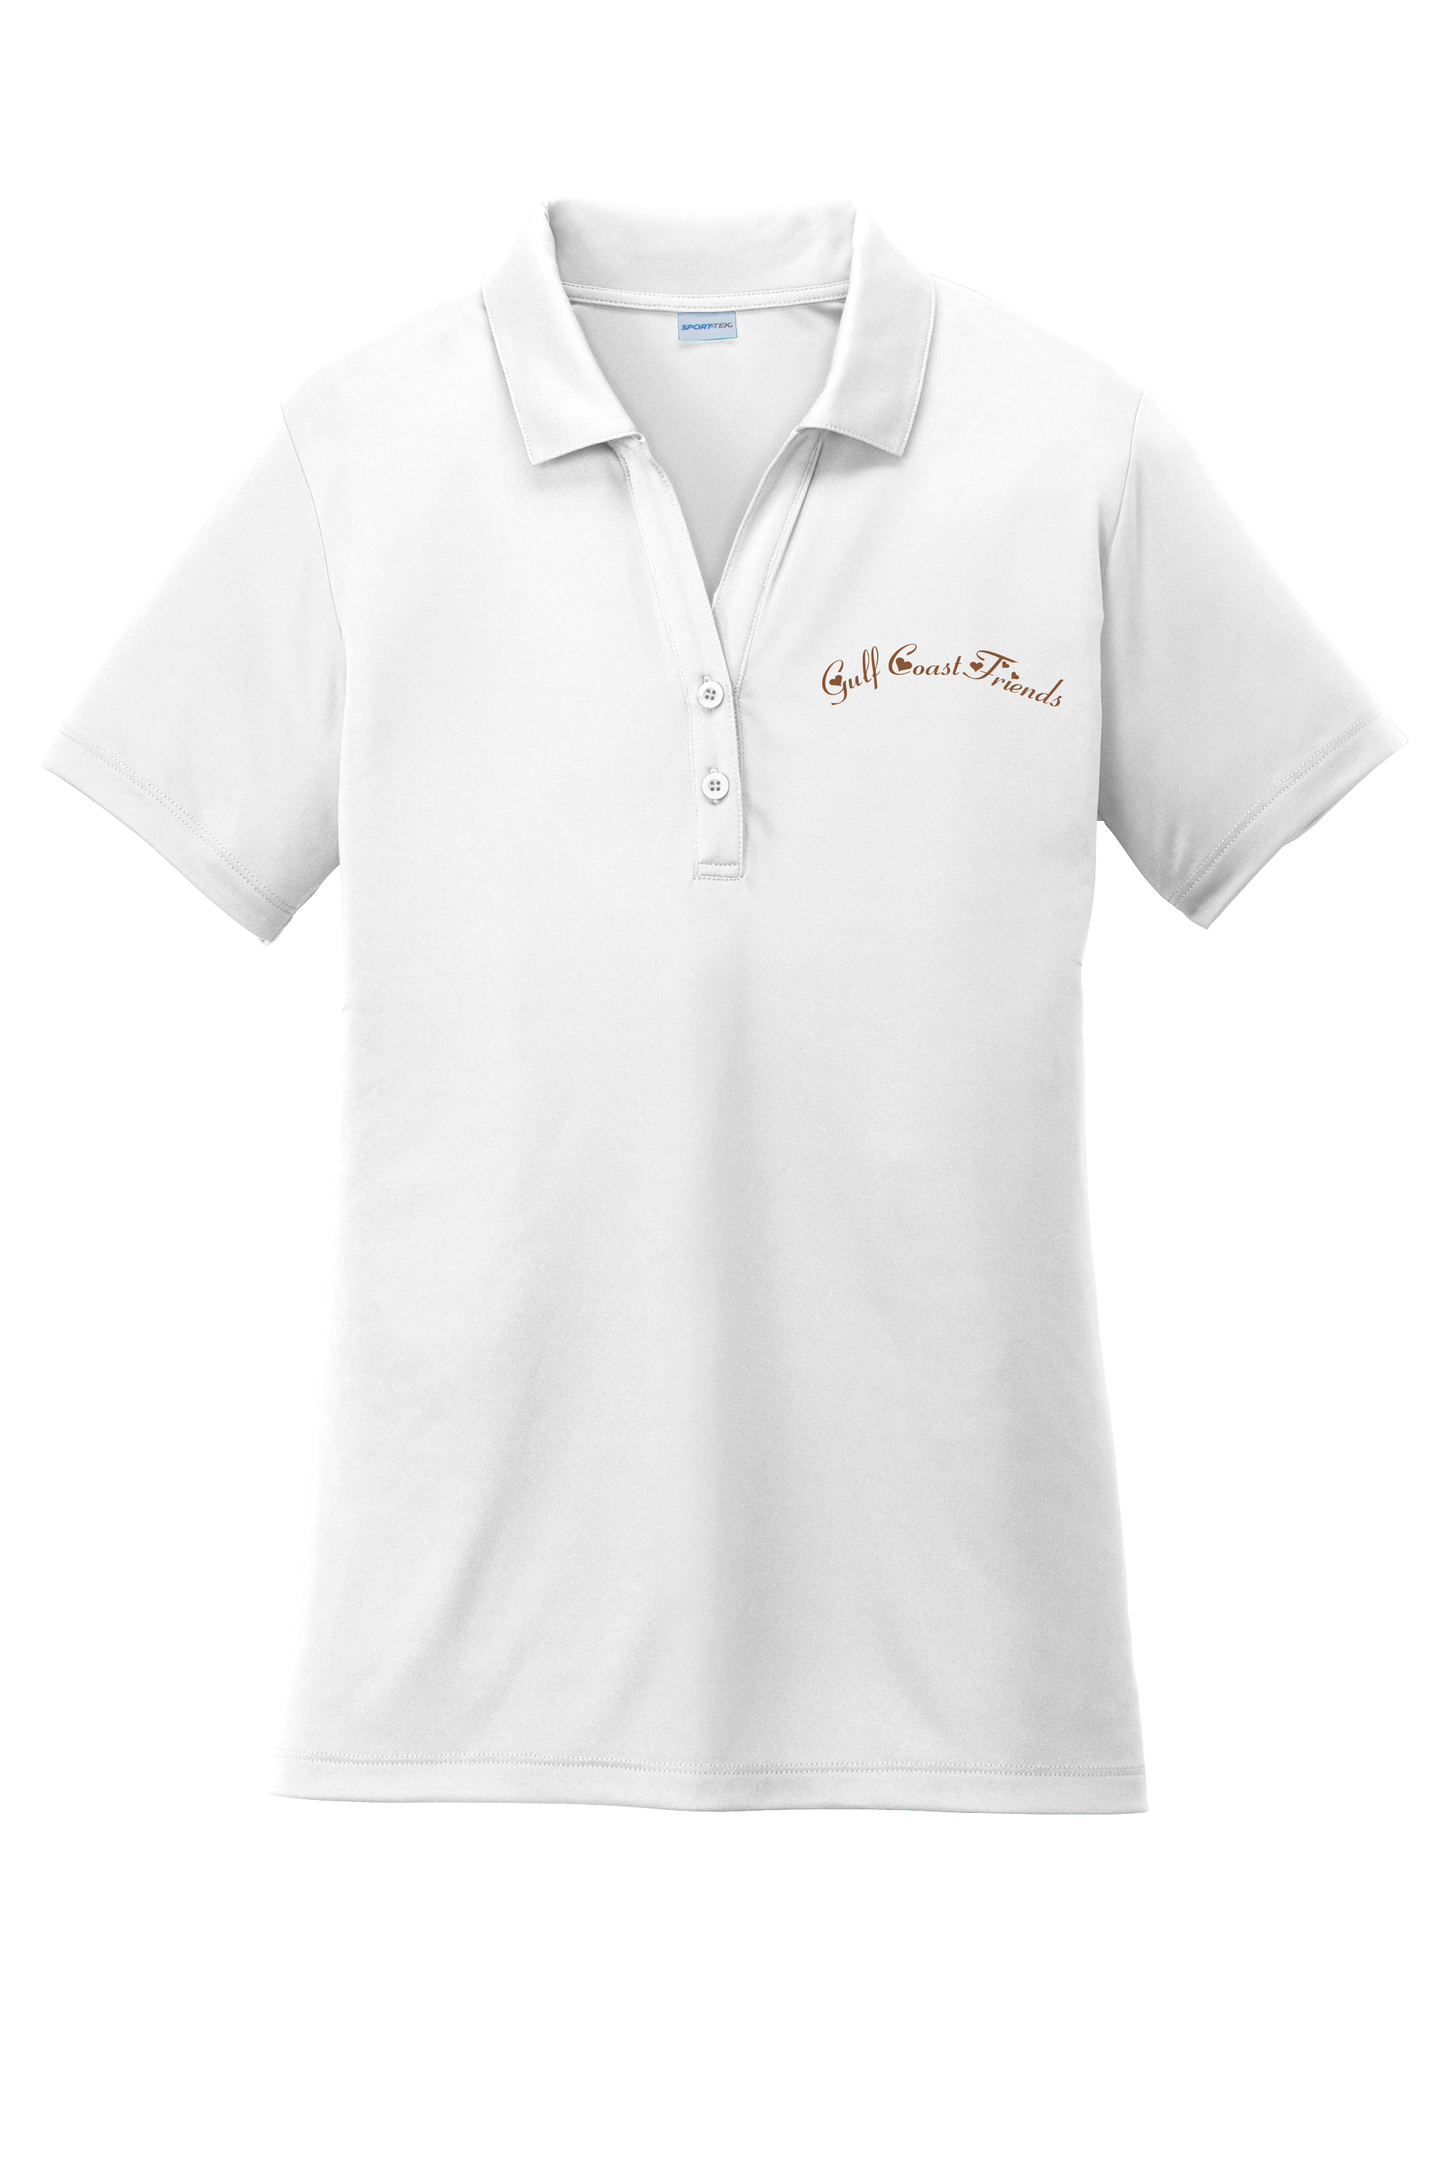 Gulf Coast Friends Short Sleeve Embroidered Polo